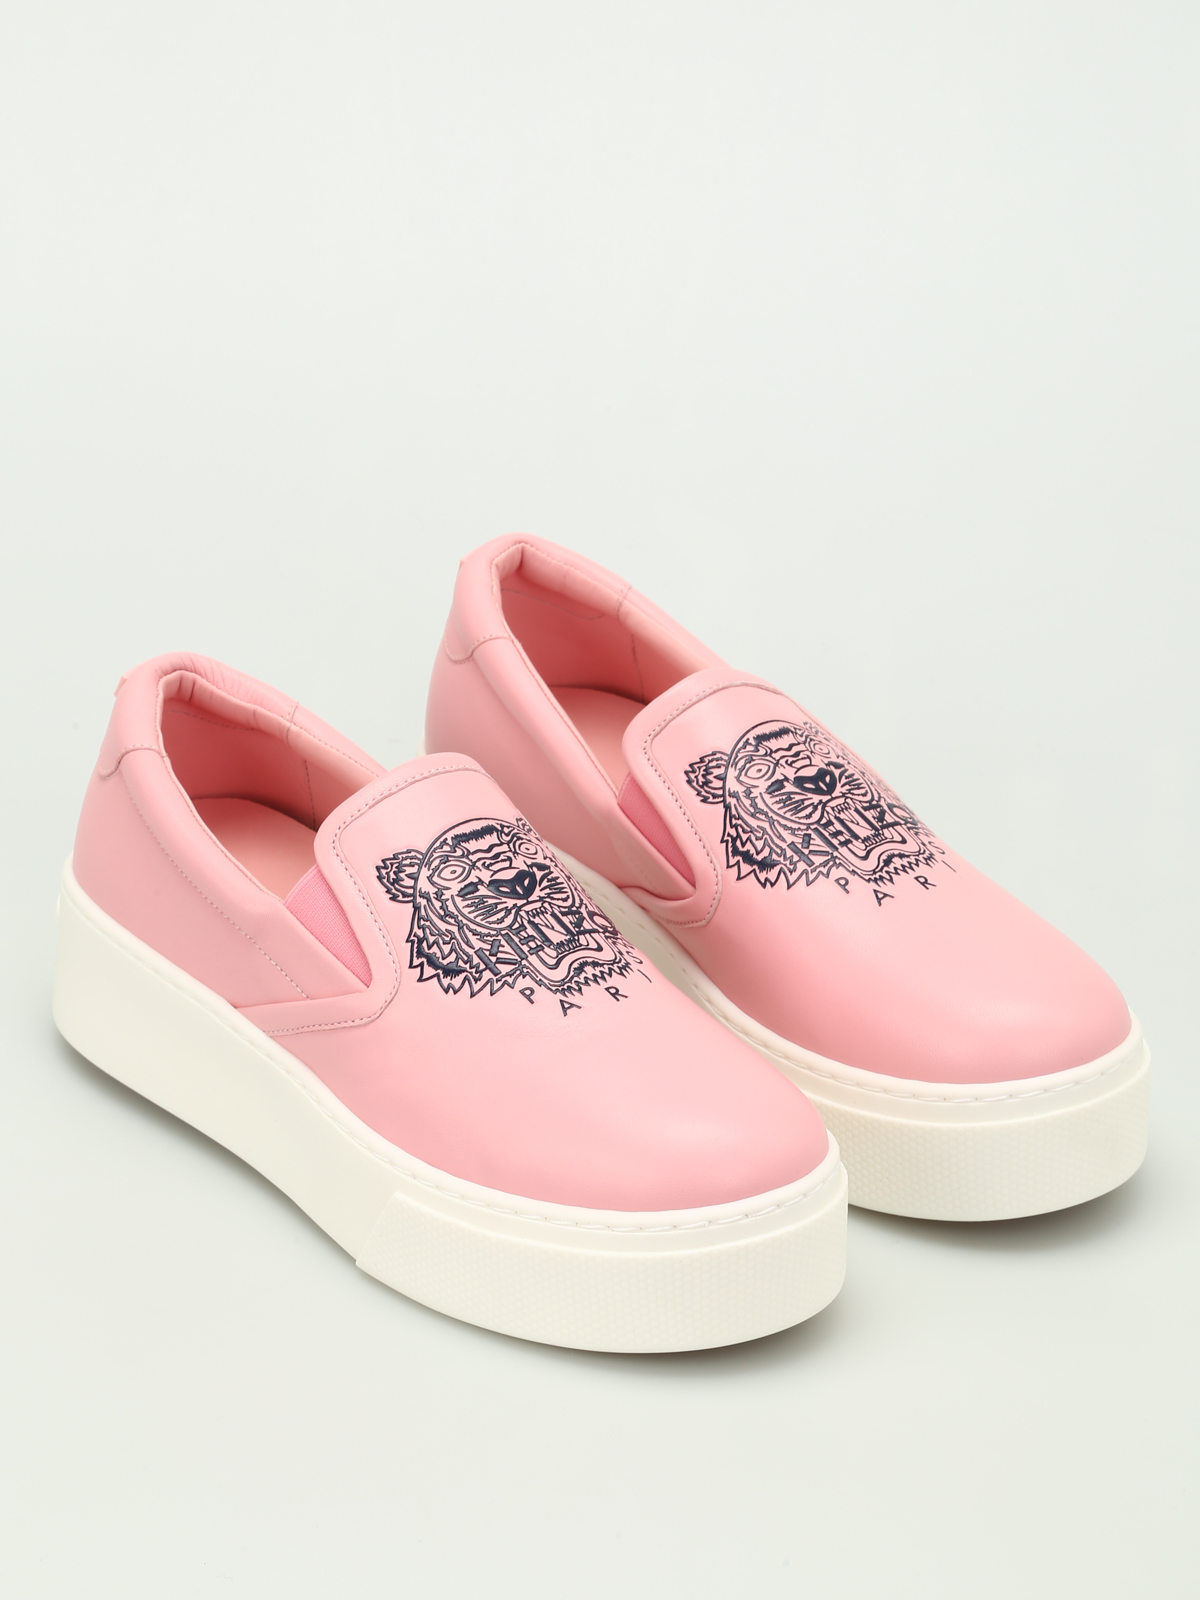 kenzo tiger slip on trainers